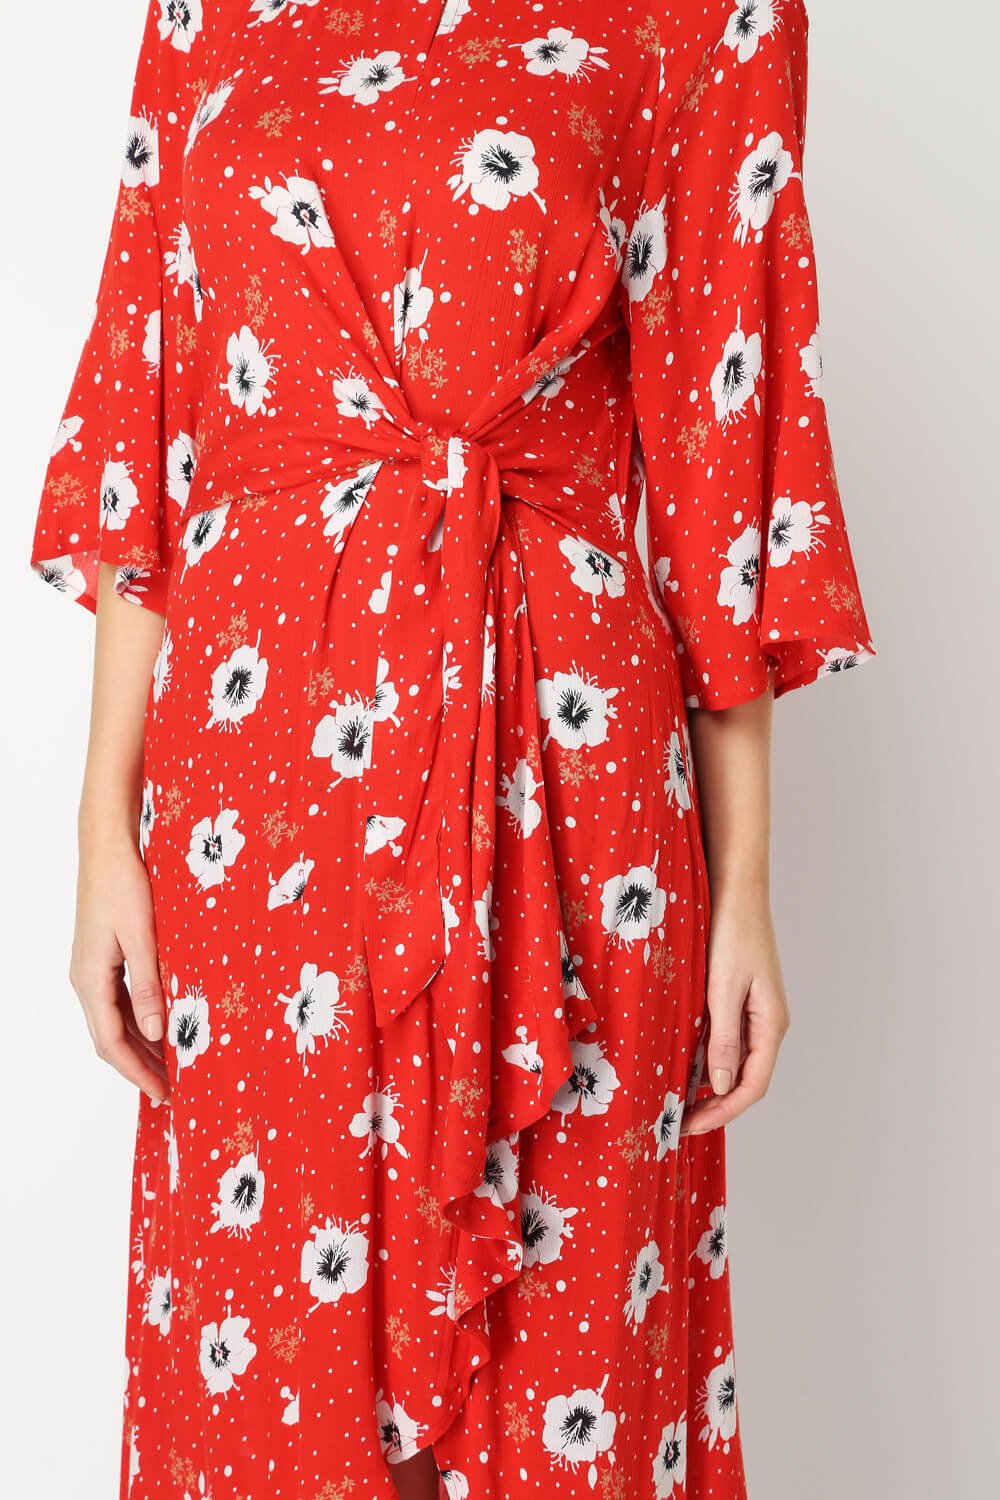 Red Floral Knot Waist Maxi Dress, Image 3 of 5